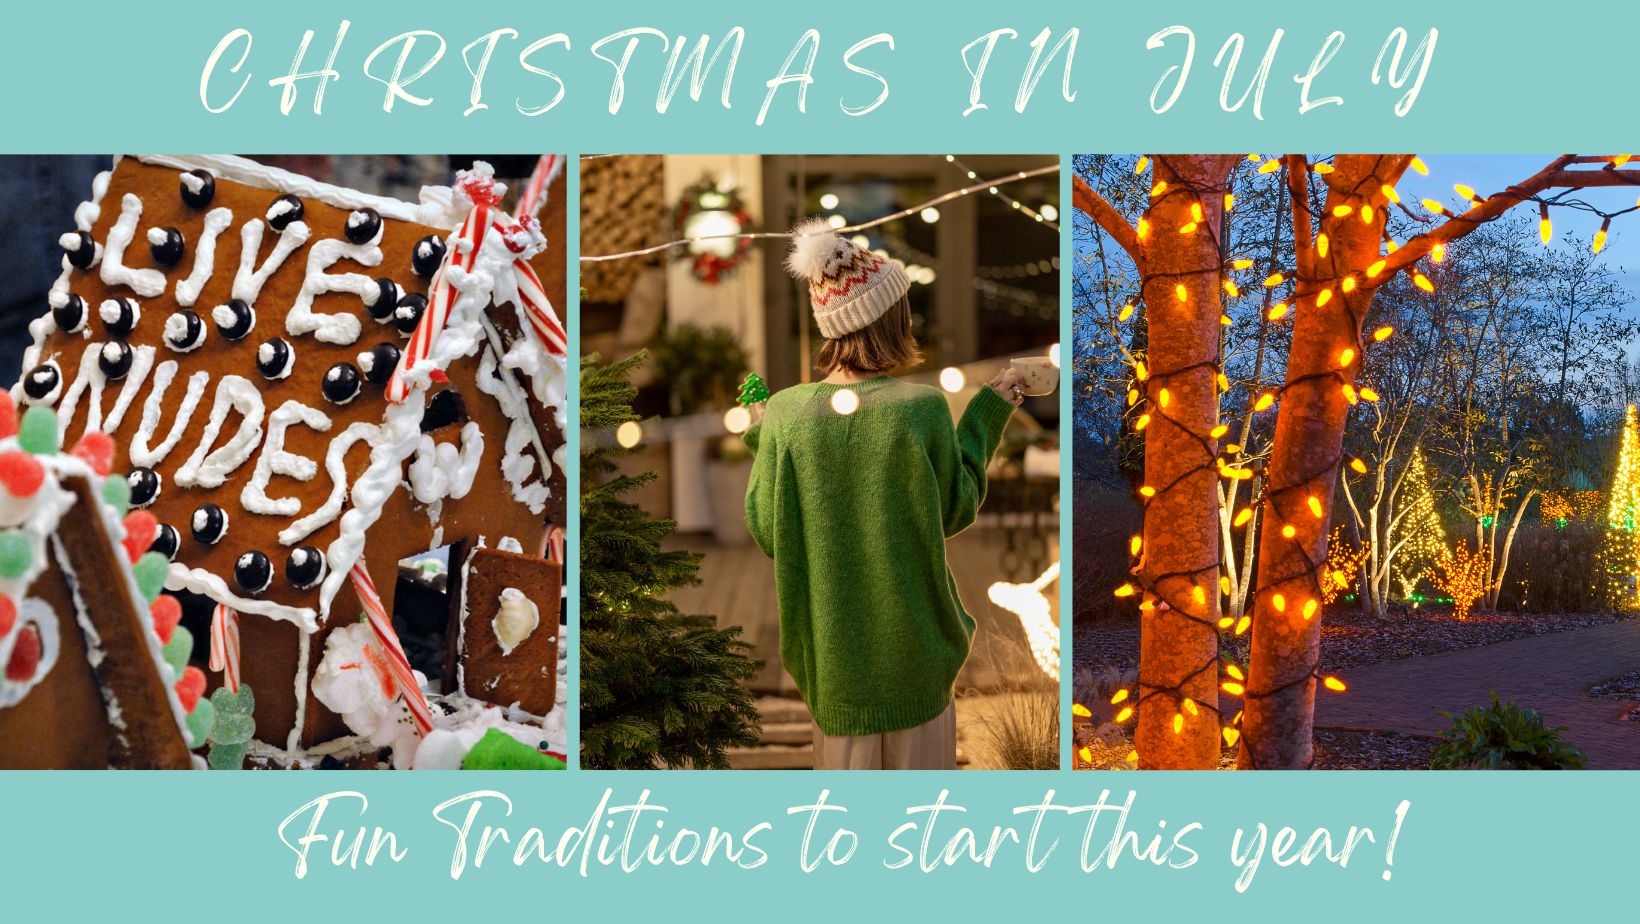 Creating Memorable Christmas in July Traditions for Your Family and Friends